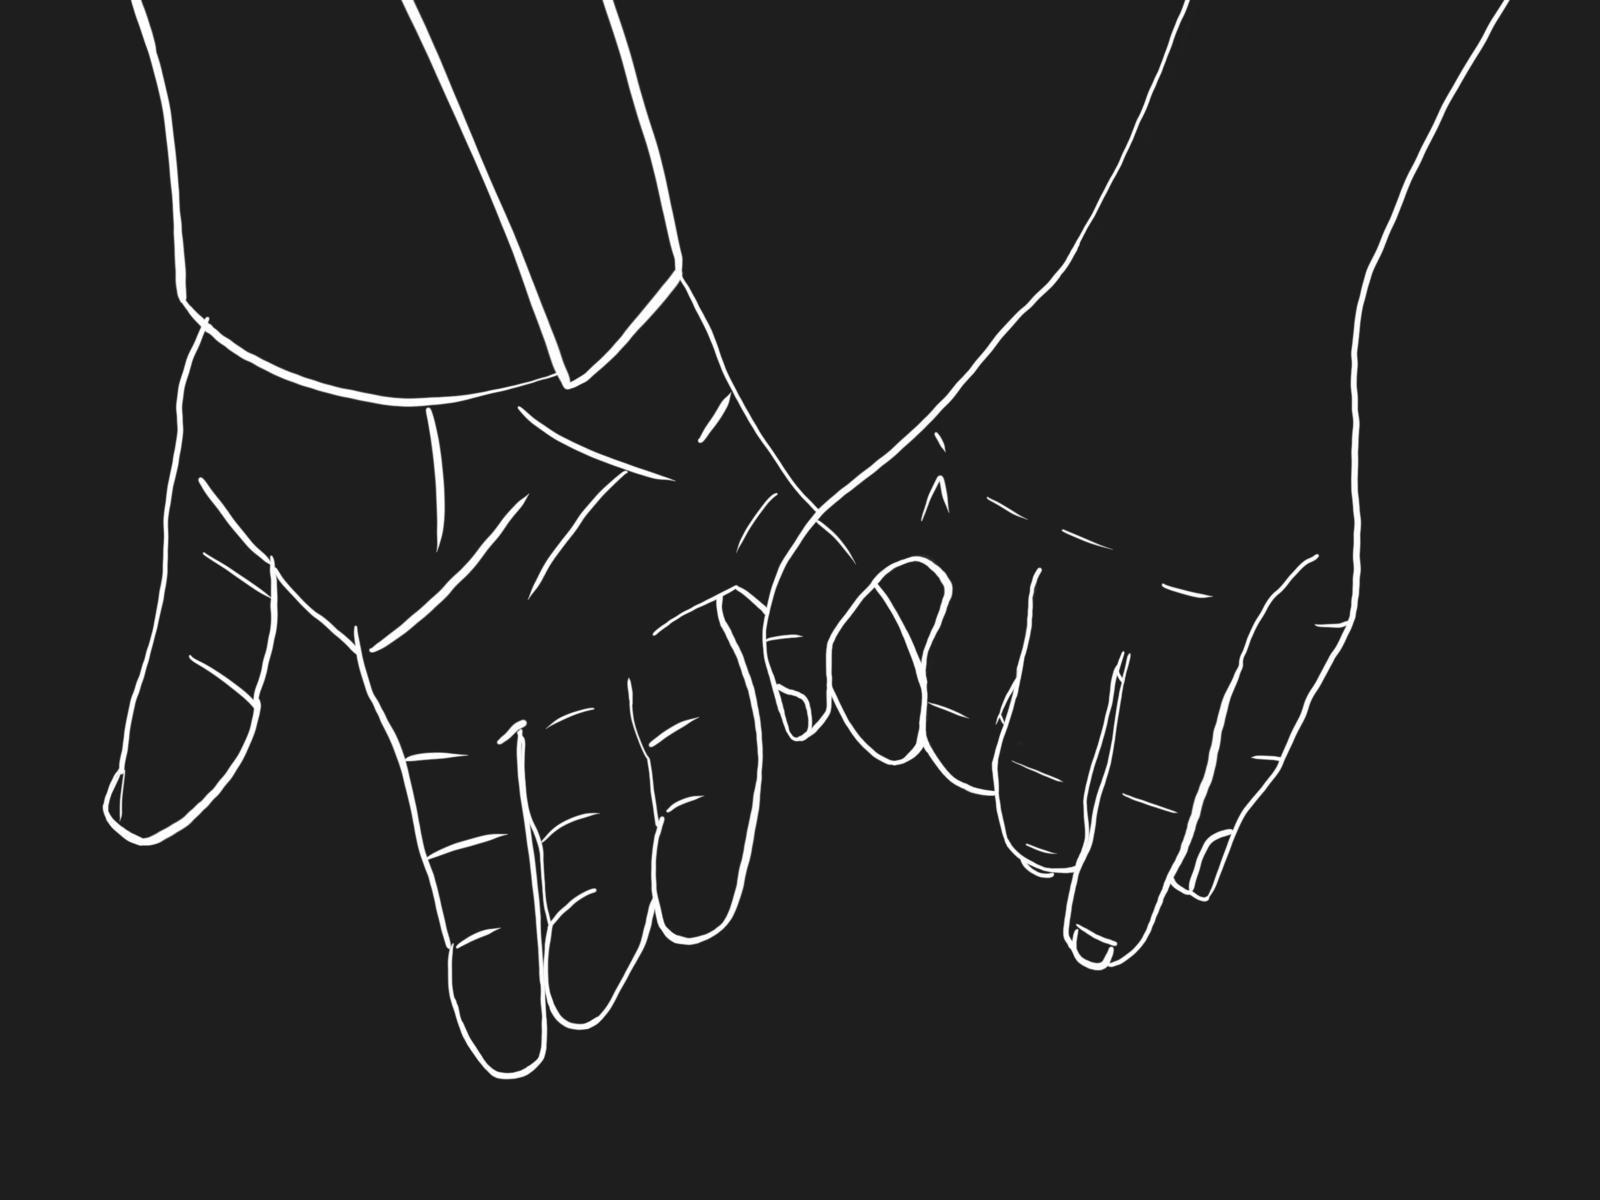 Illustrated hands by Kristen Cork on Dribbble